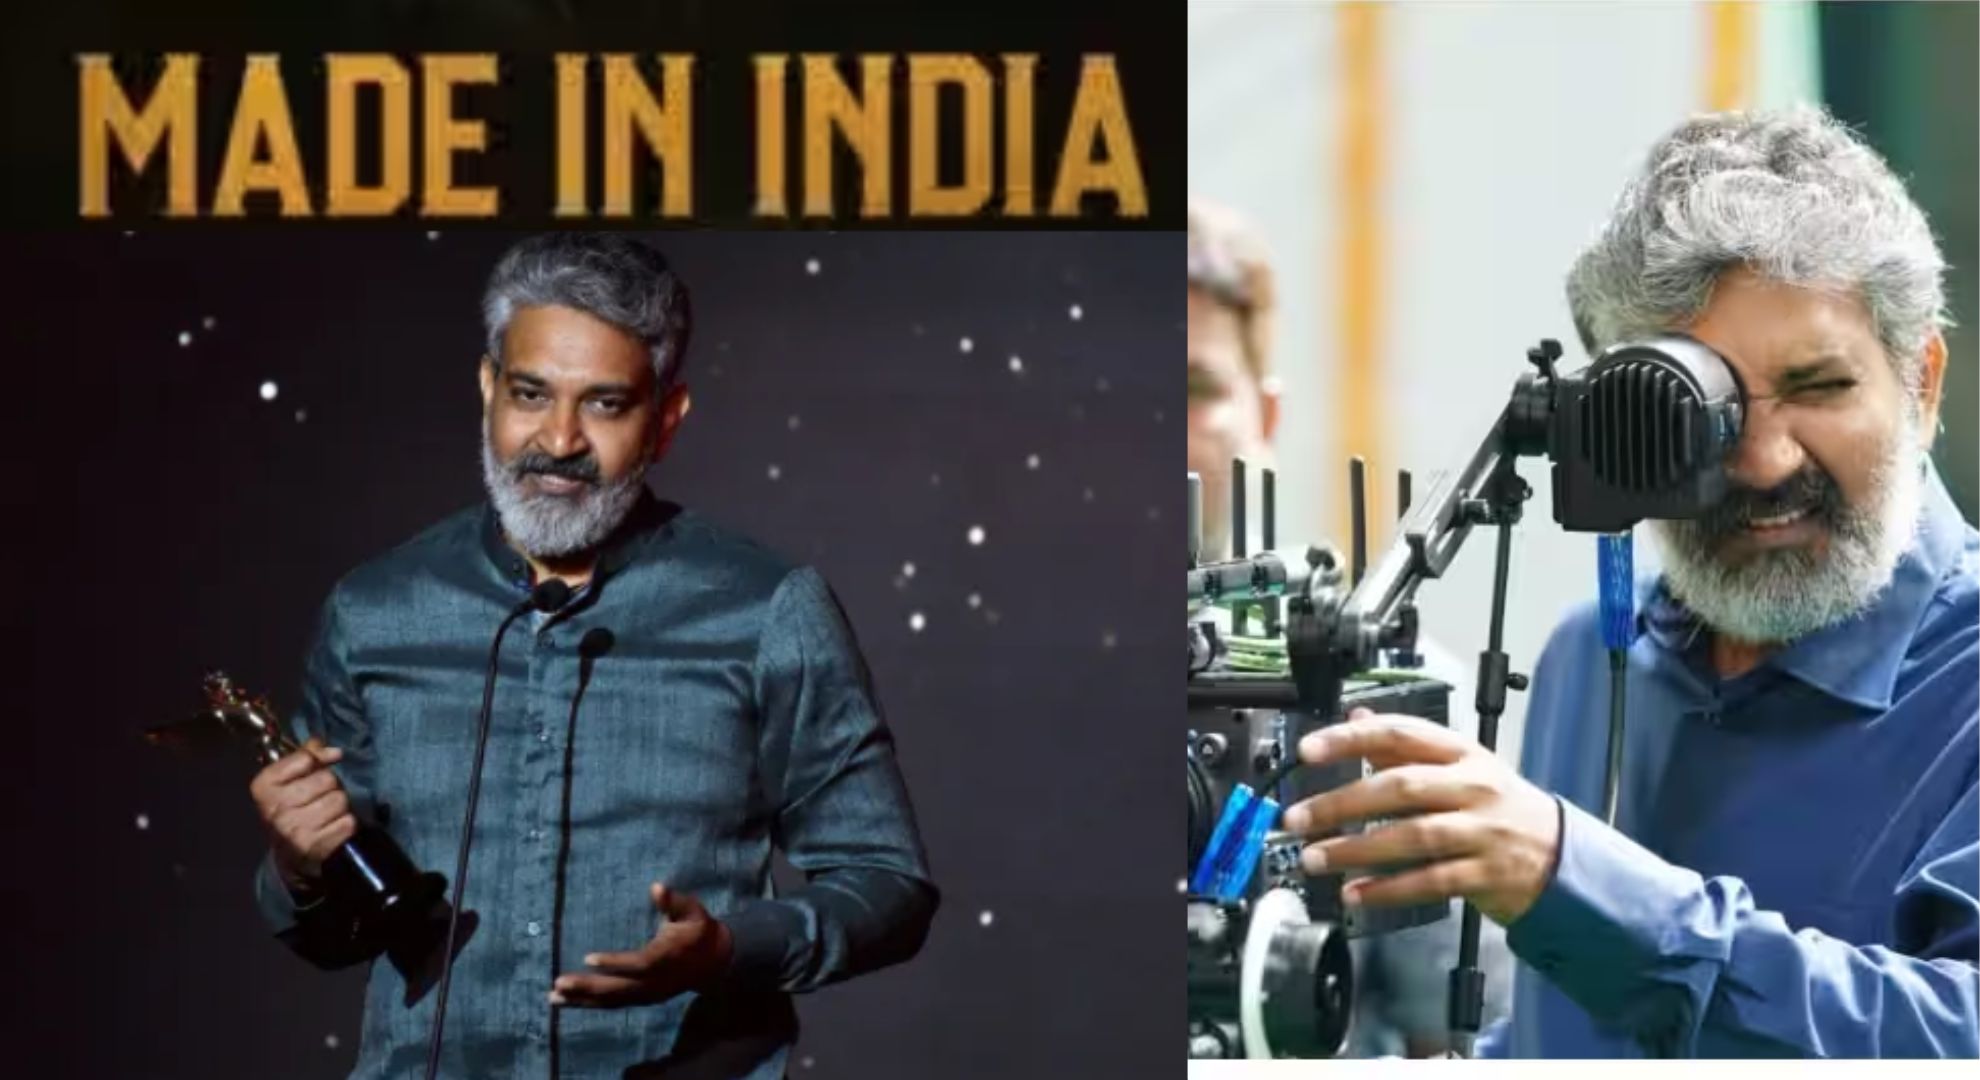 SS Rajamouli, South Film Director, Made In India